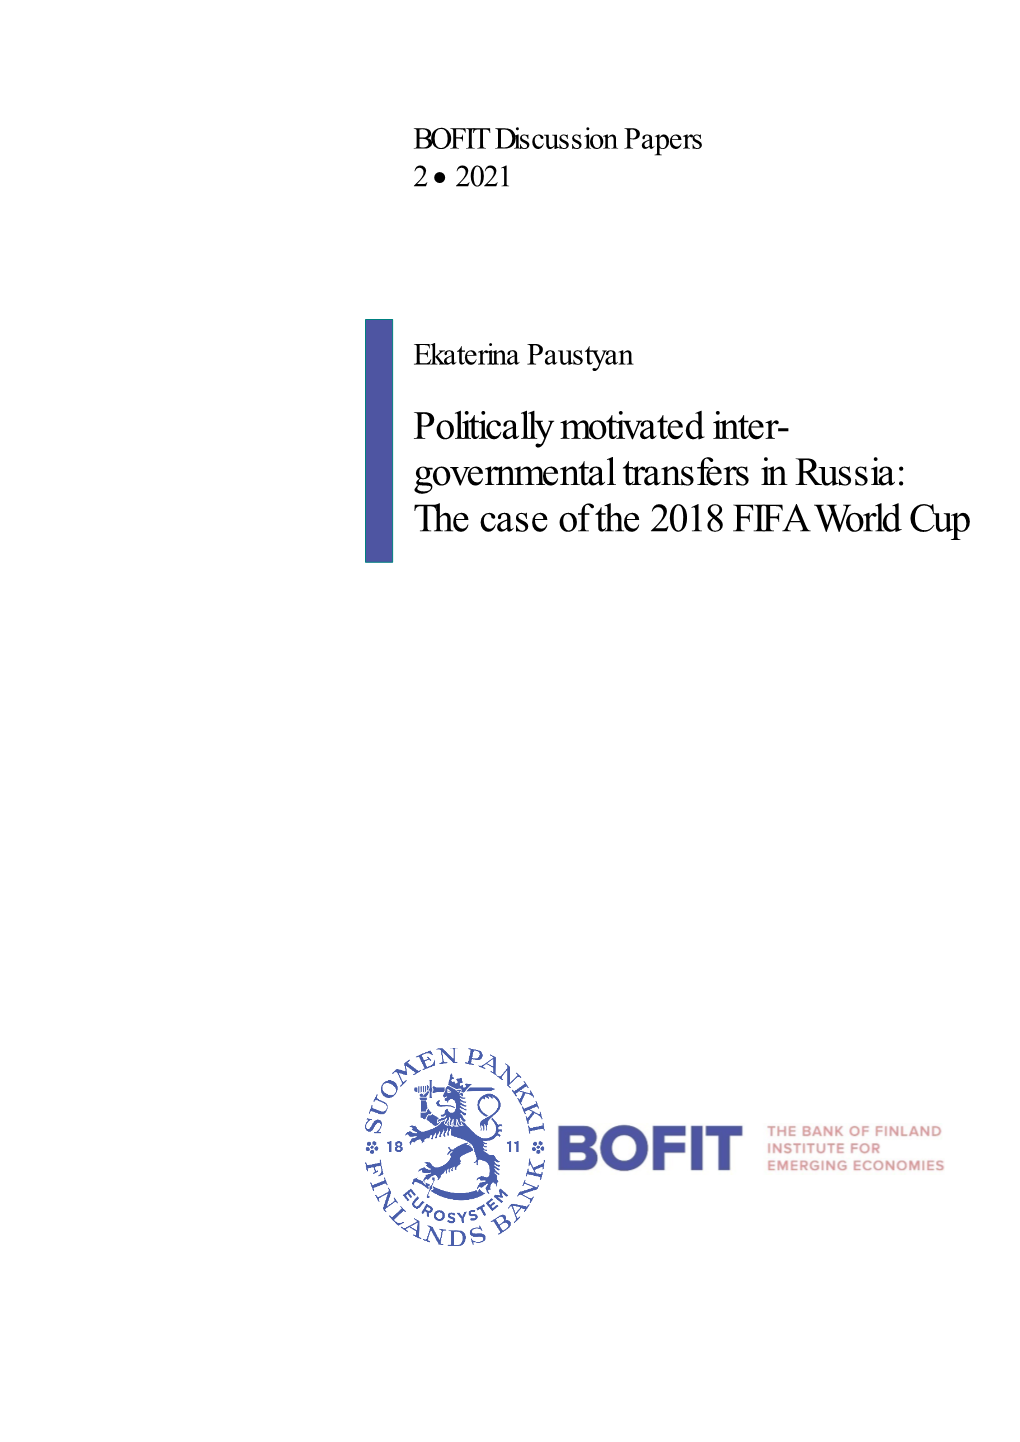 Politically Motivated Intergovernmental Transfers in Russia: the Case of the 2018 FIFA World Cup